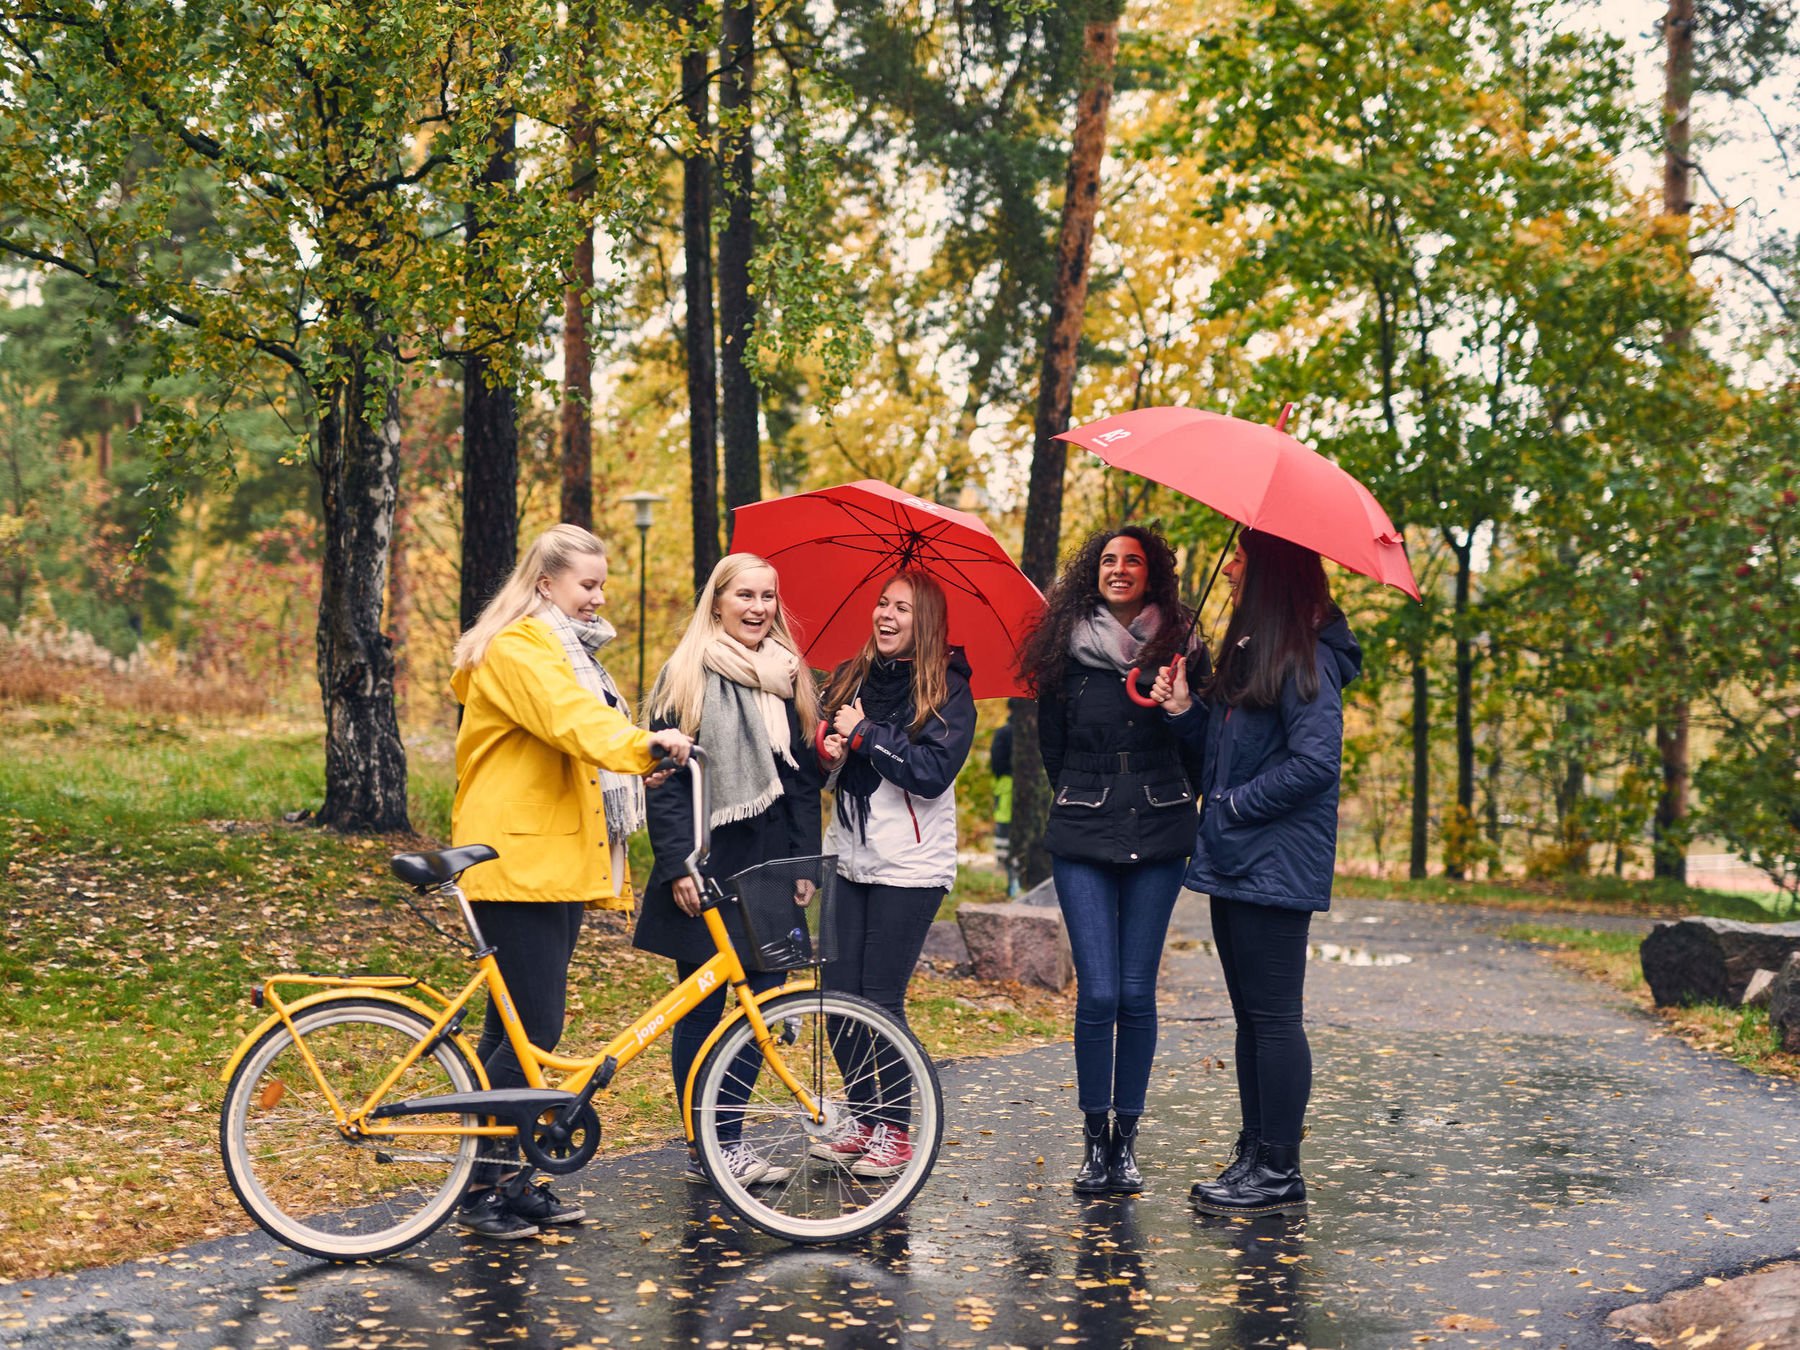 Five people with a yellow bike and red umbrellas on autumnal campus